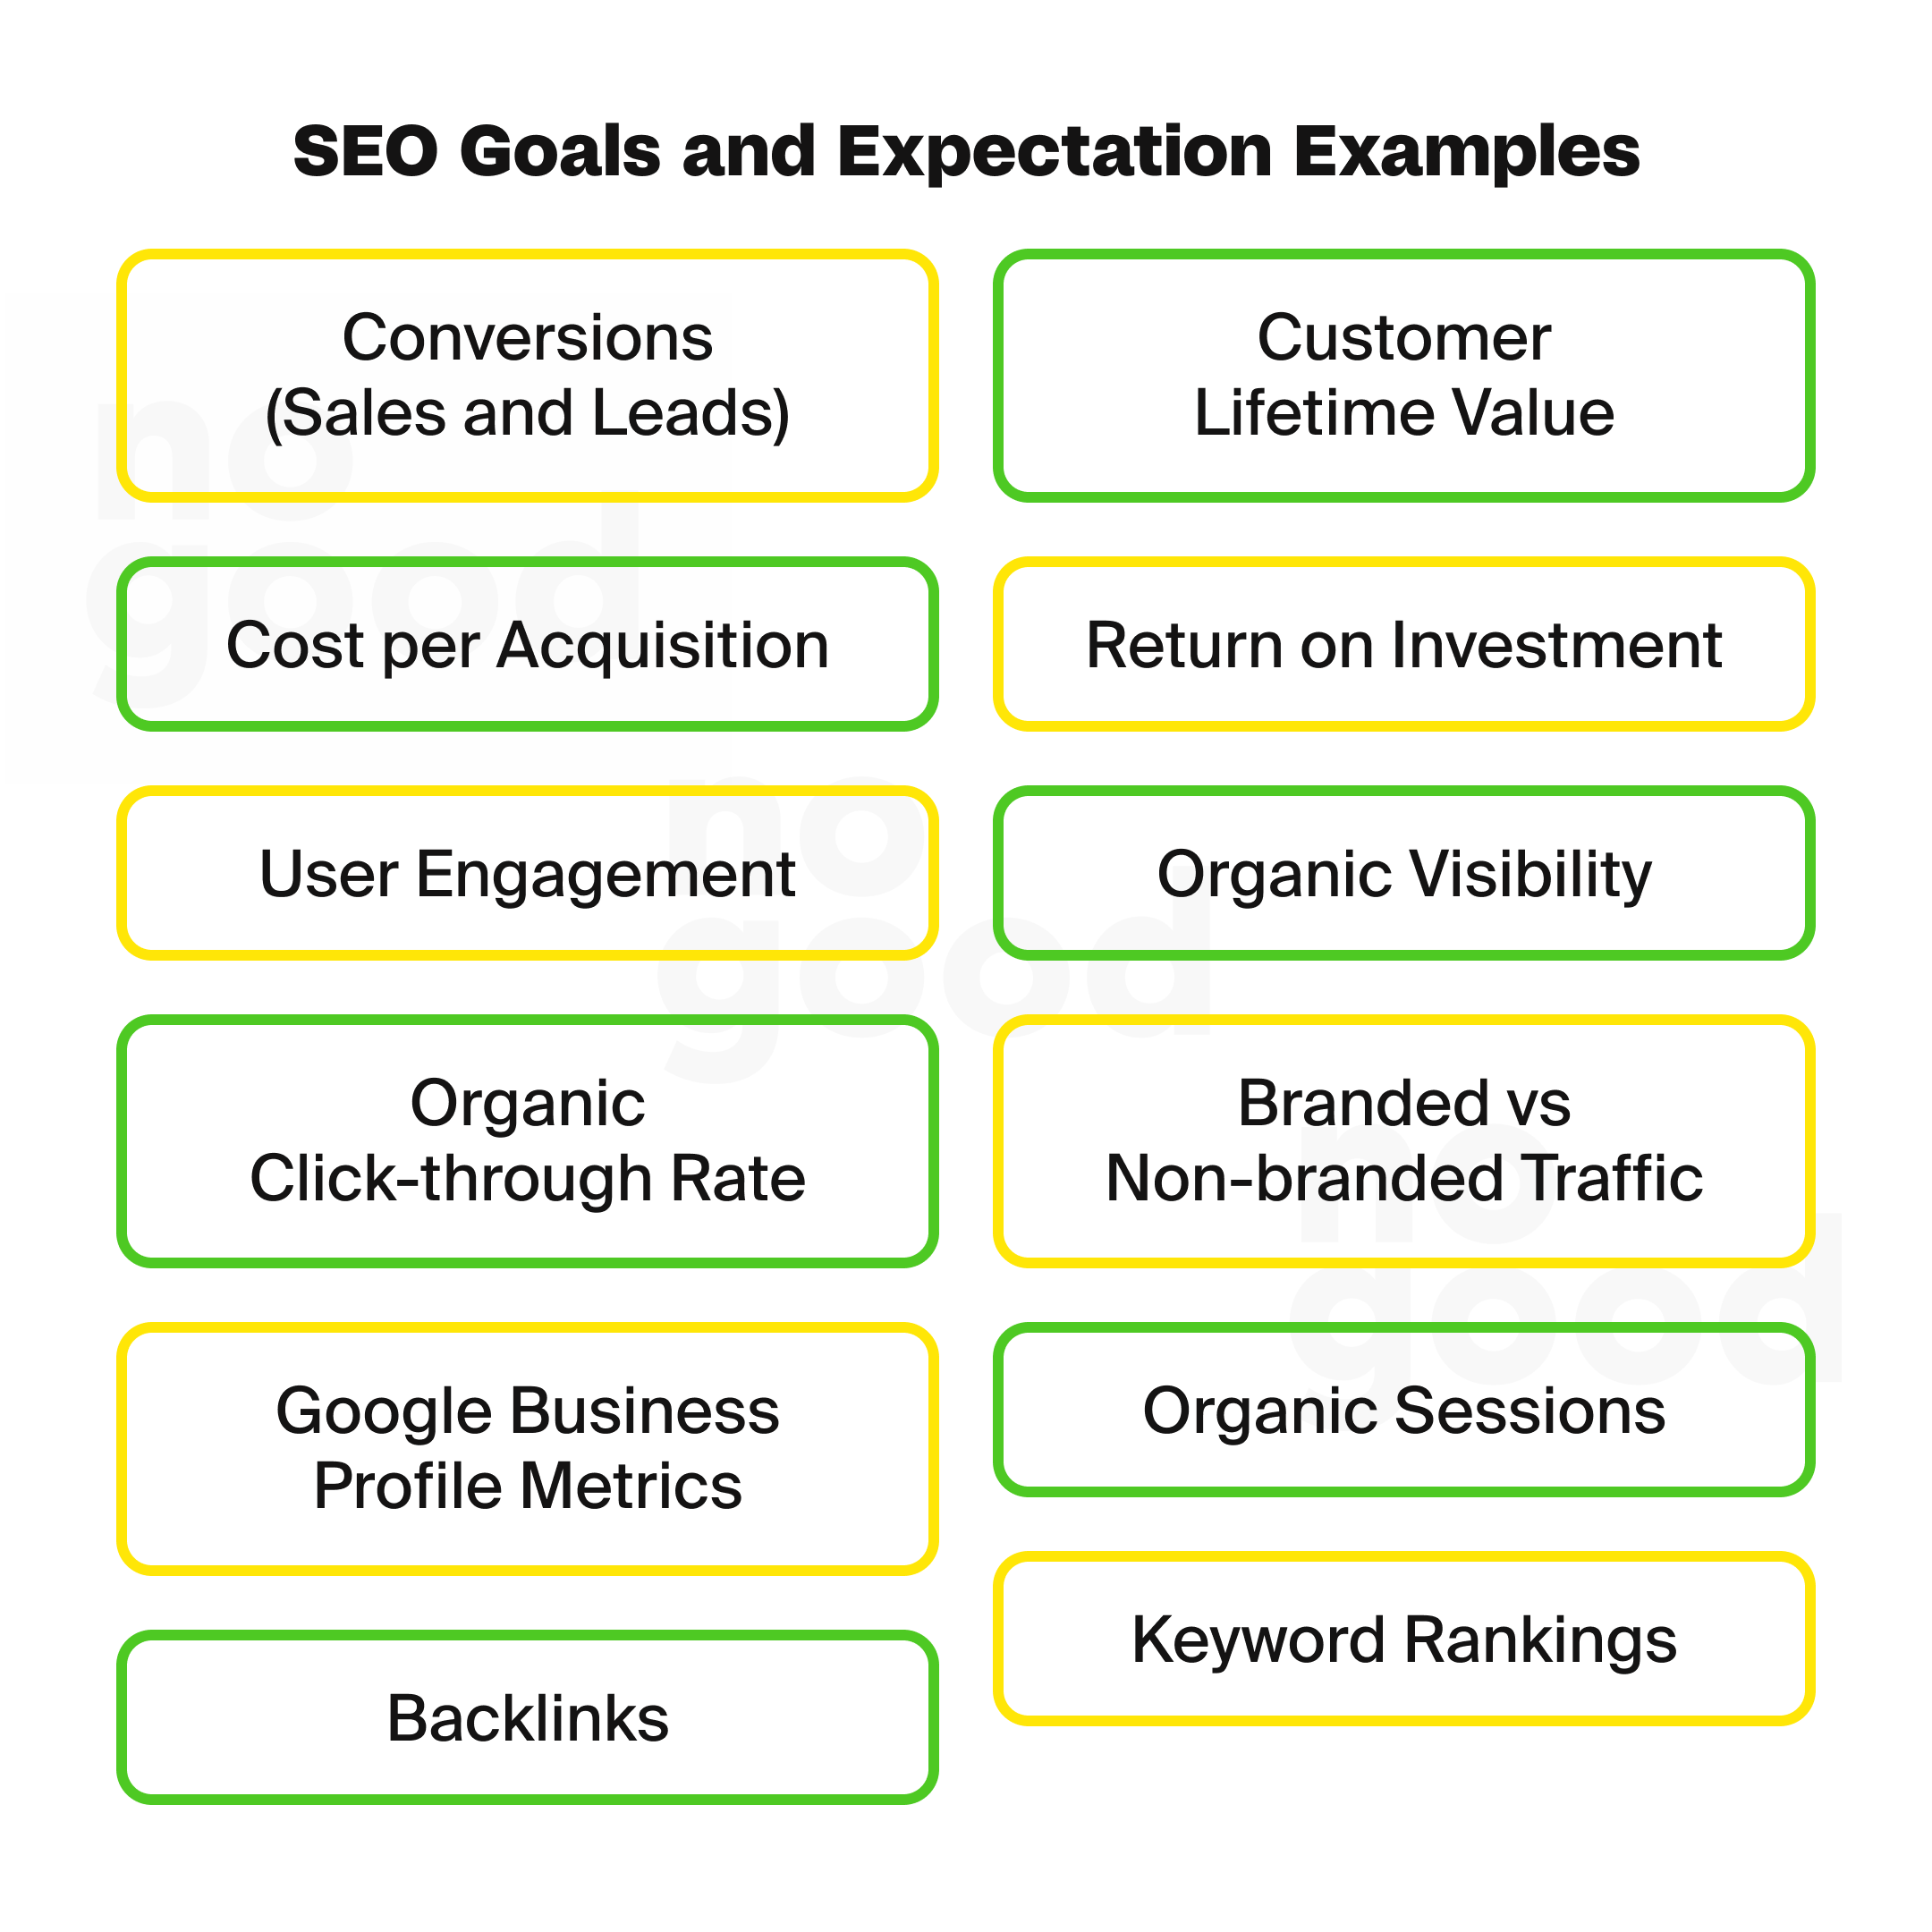 SEO goals and expectation examples